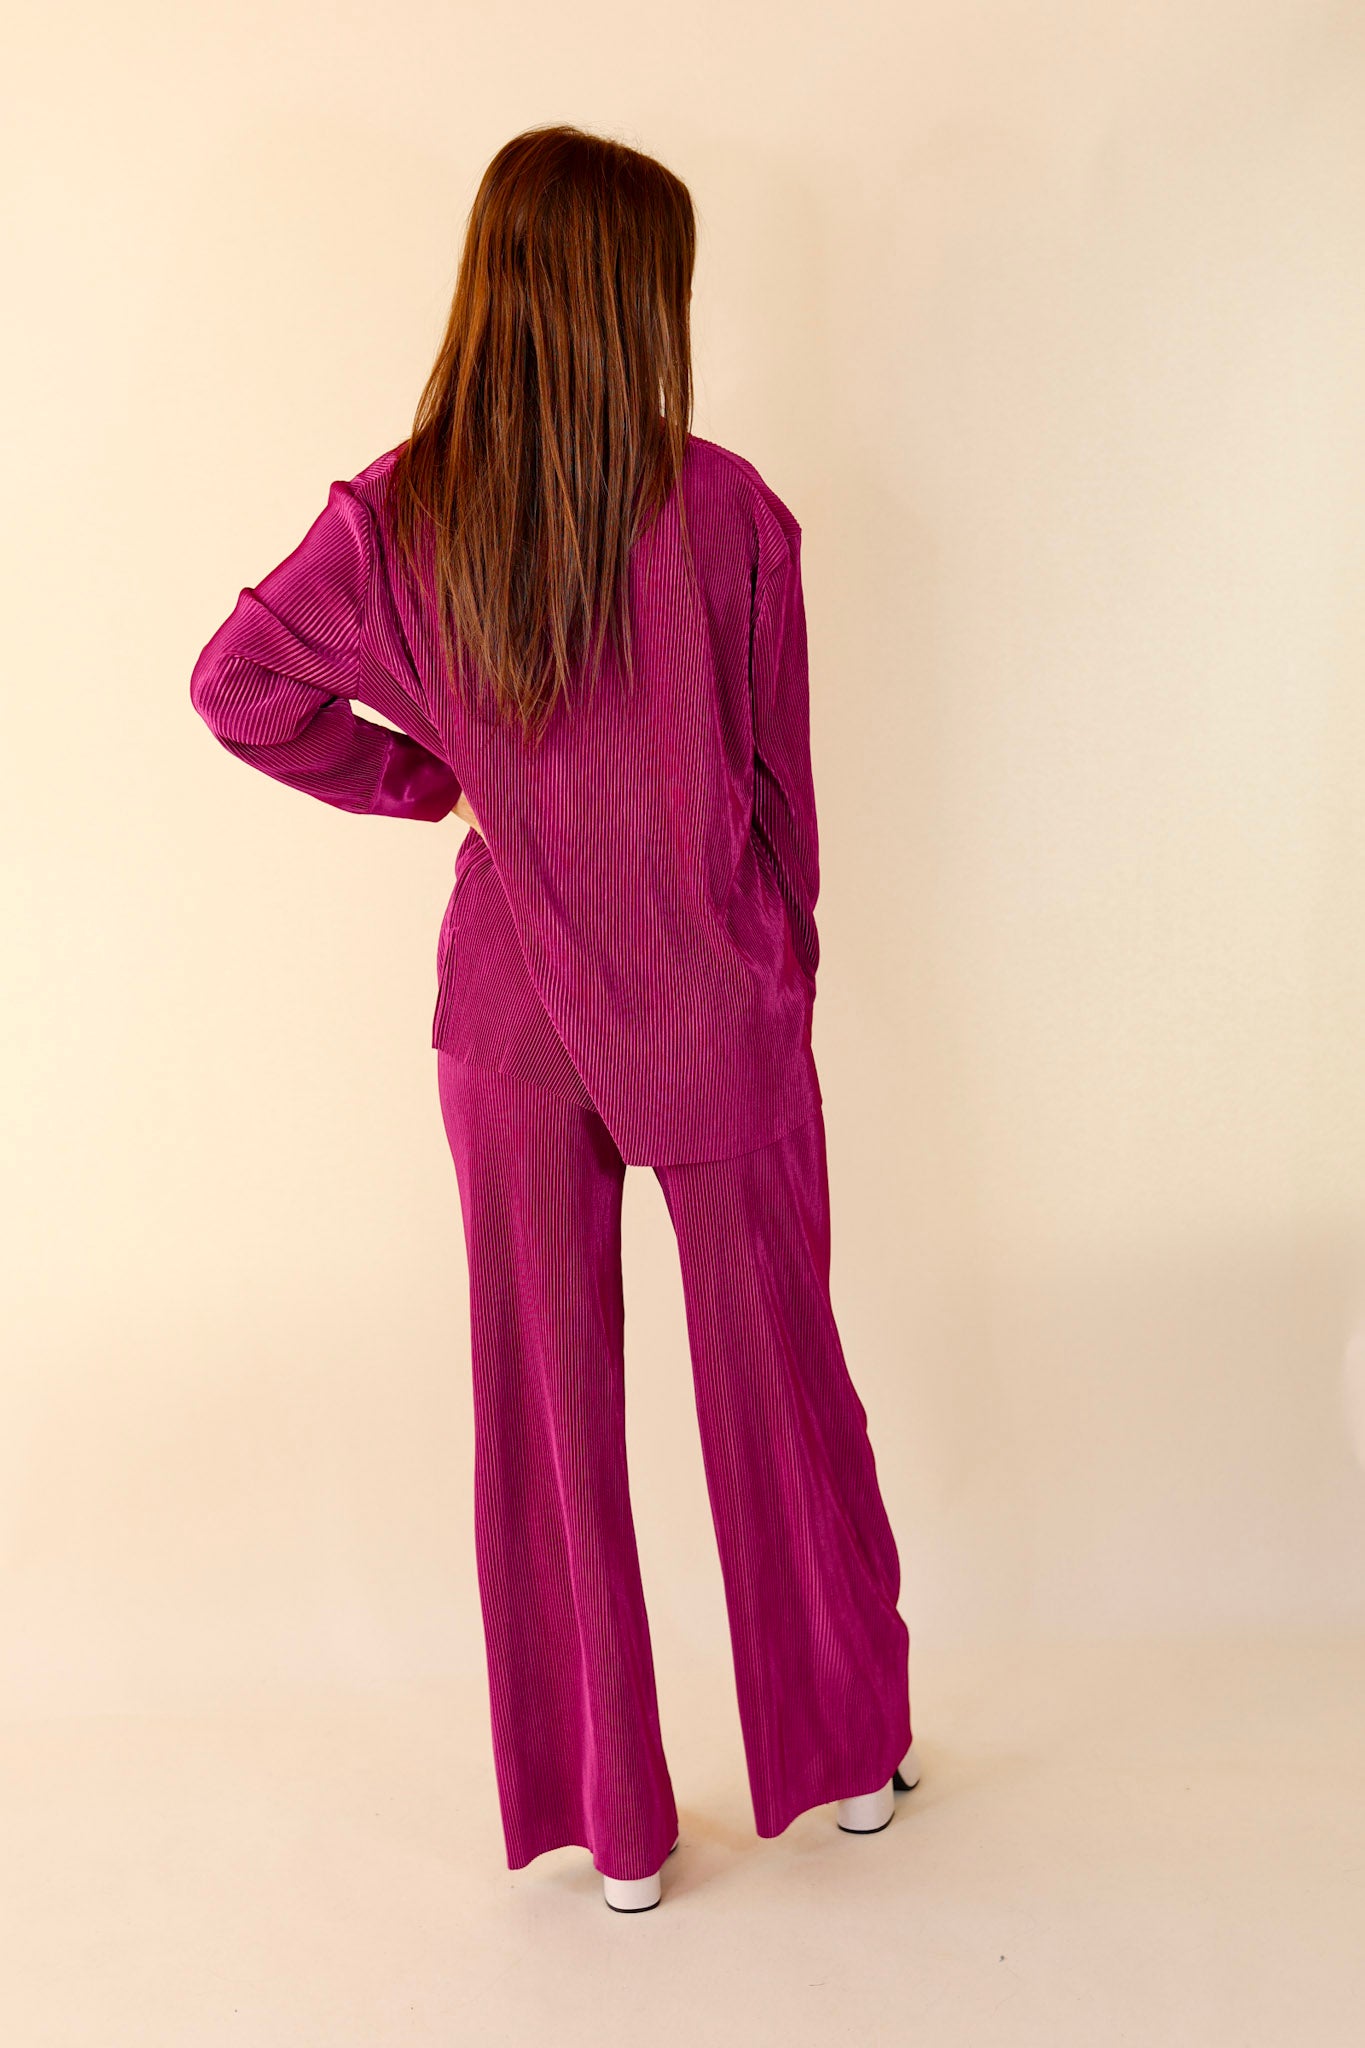 Dazzling Satin Plissé Ribbed Pants in Magenta Pink - Giddy Up Glamour Boutique